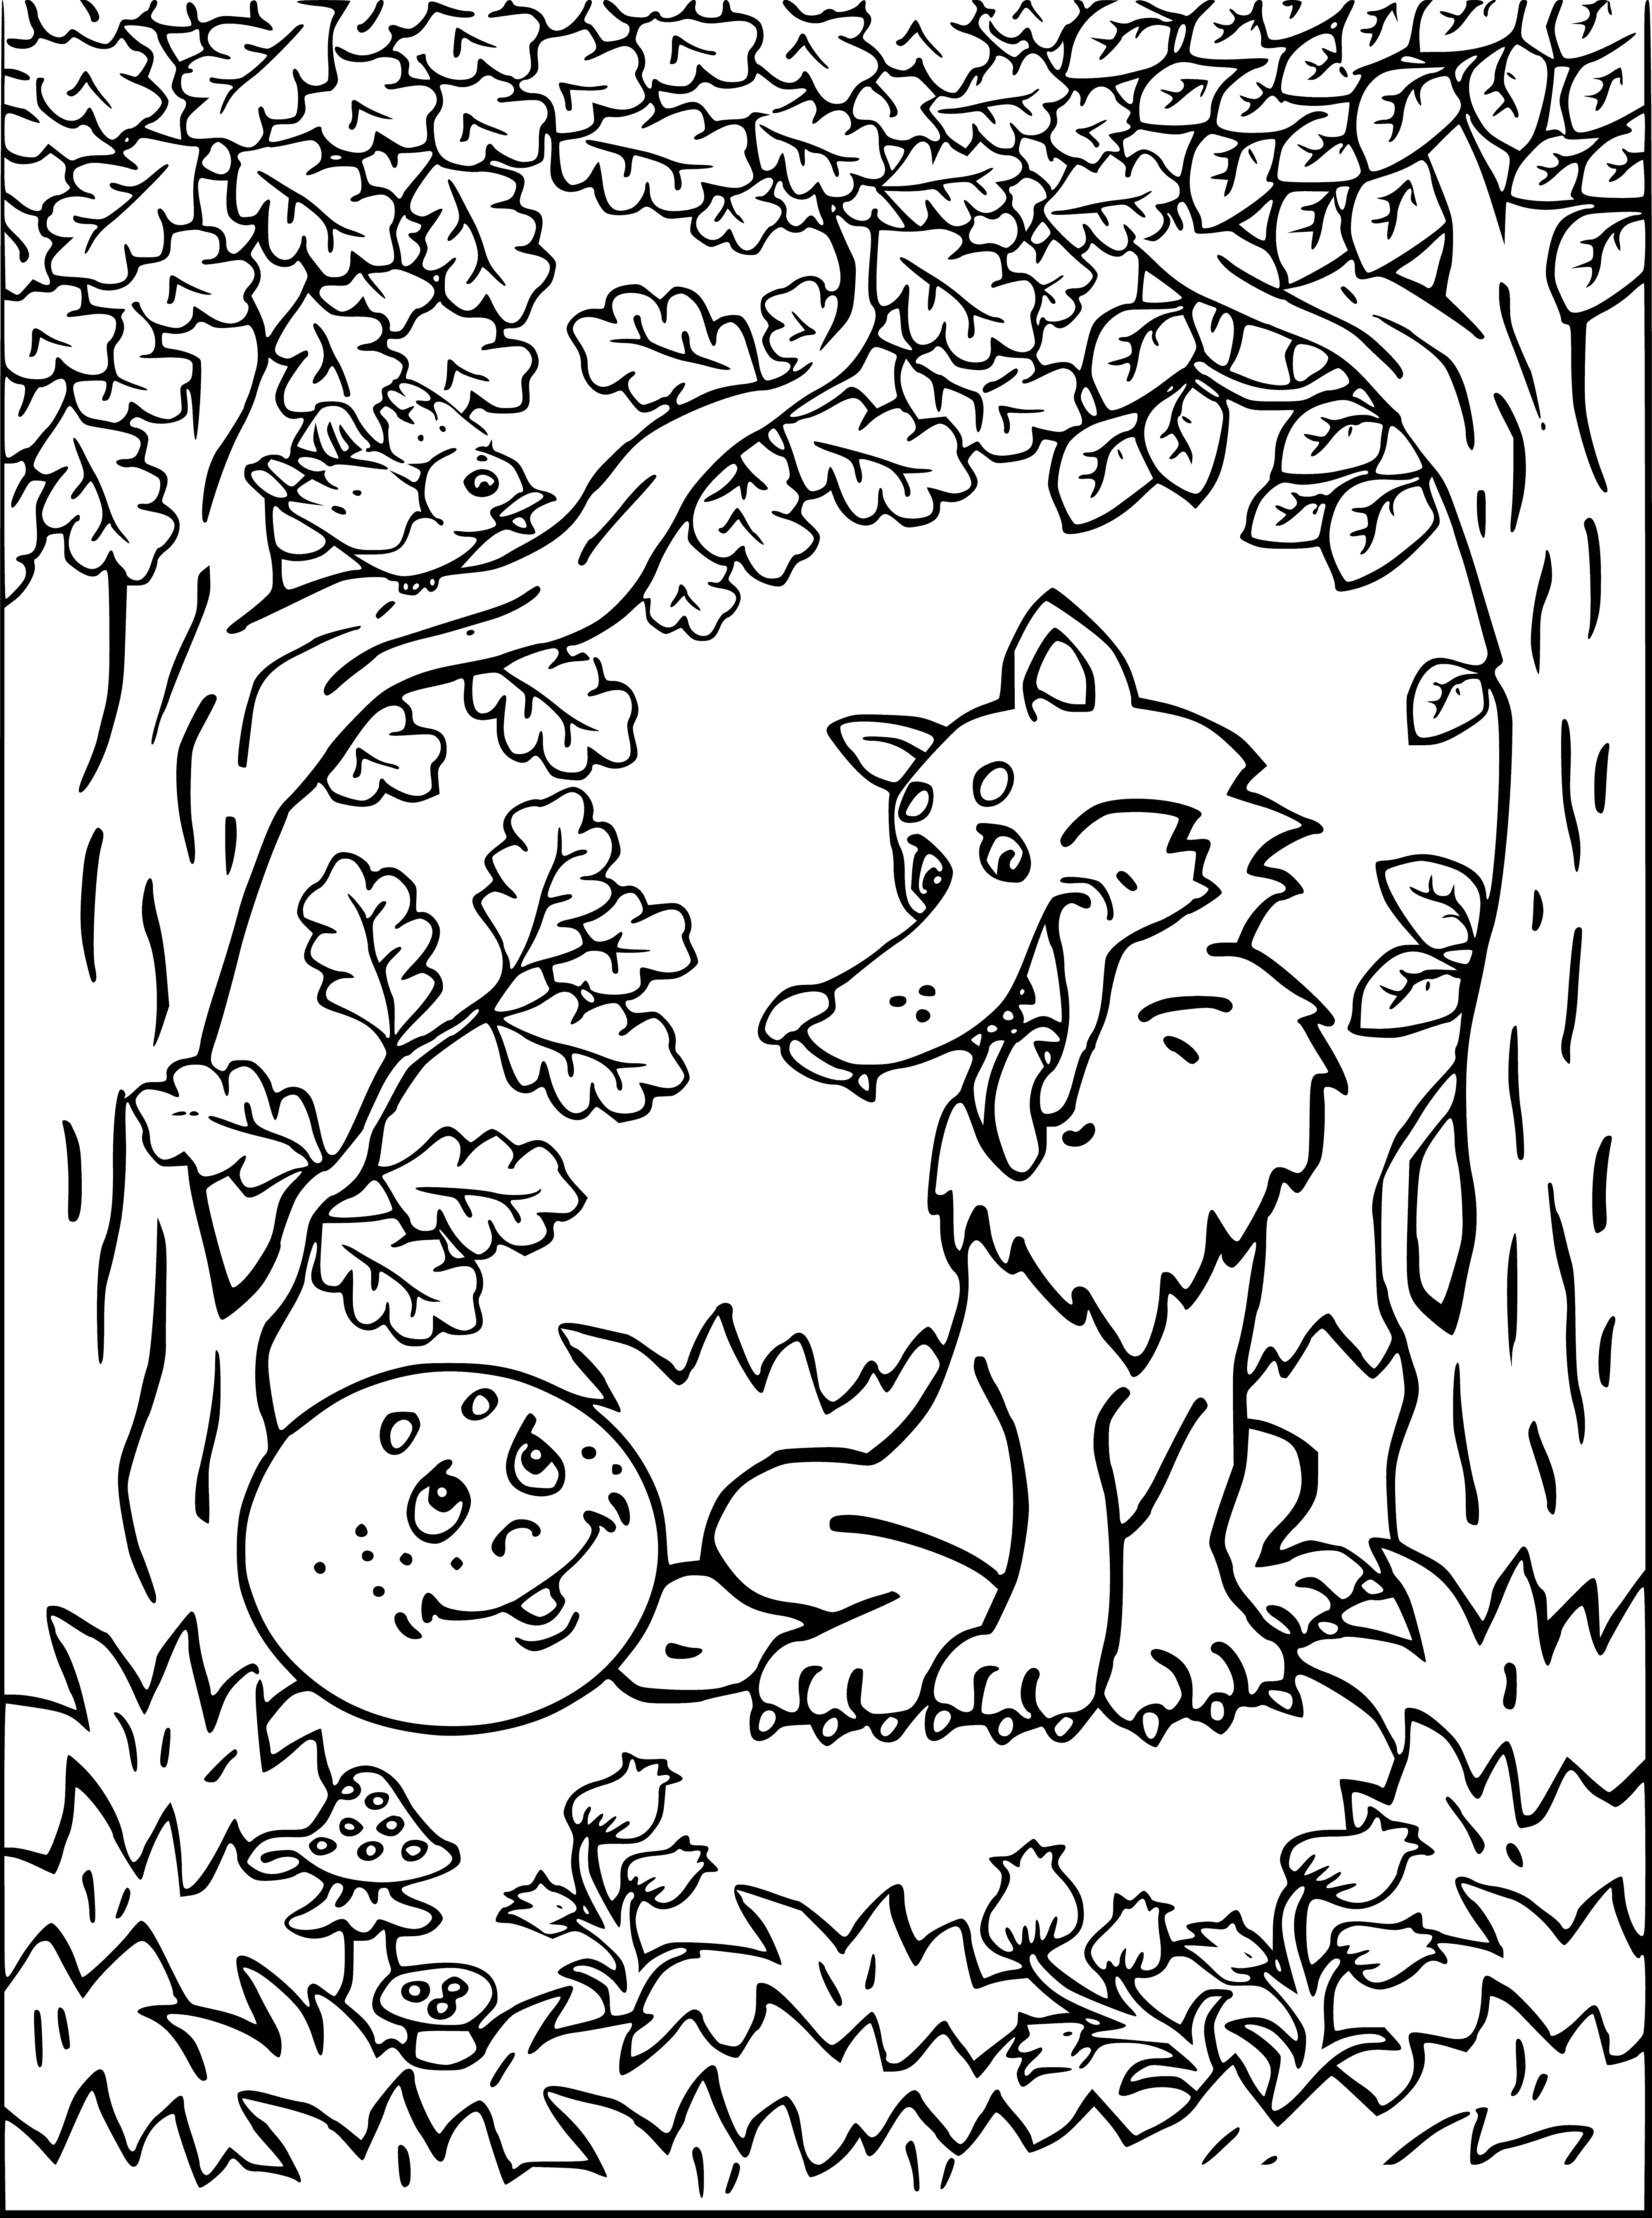 coloring page: A gingerbread man armed with a knife & spoon runs from a wolf, outsmarting it and escaping.